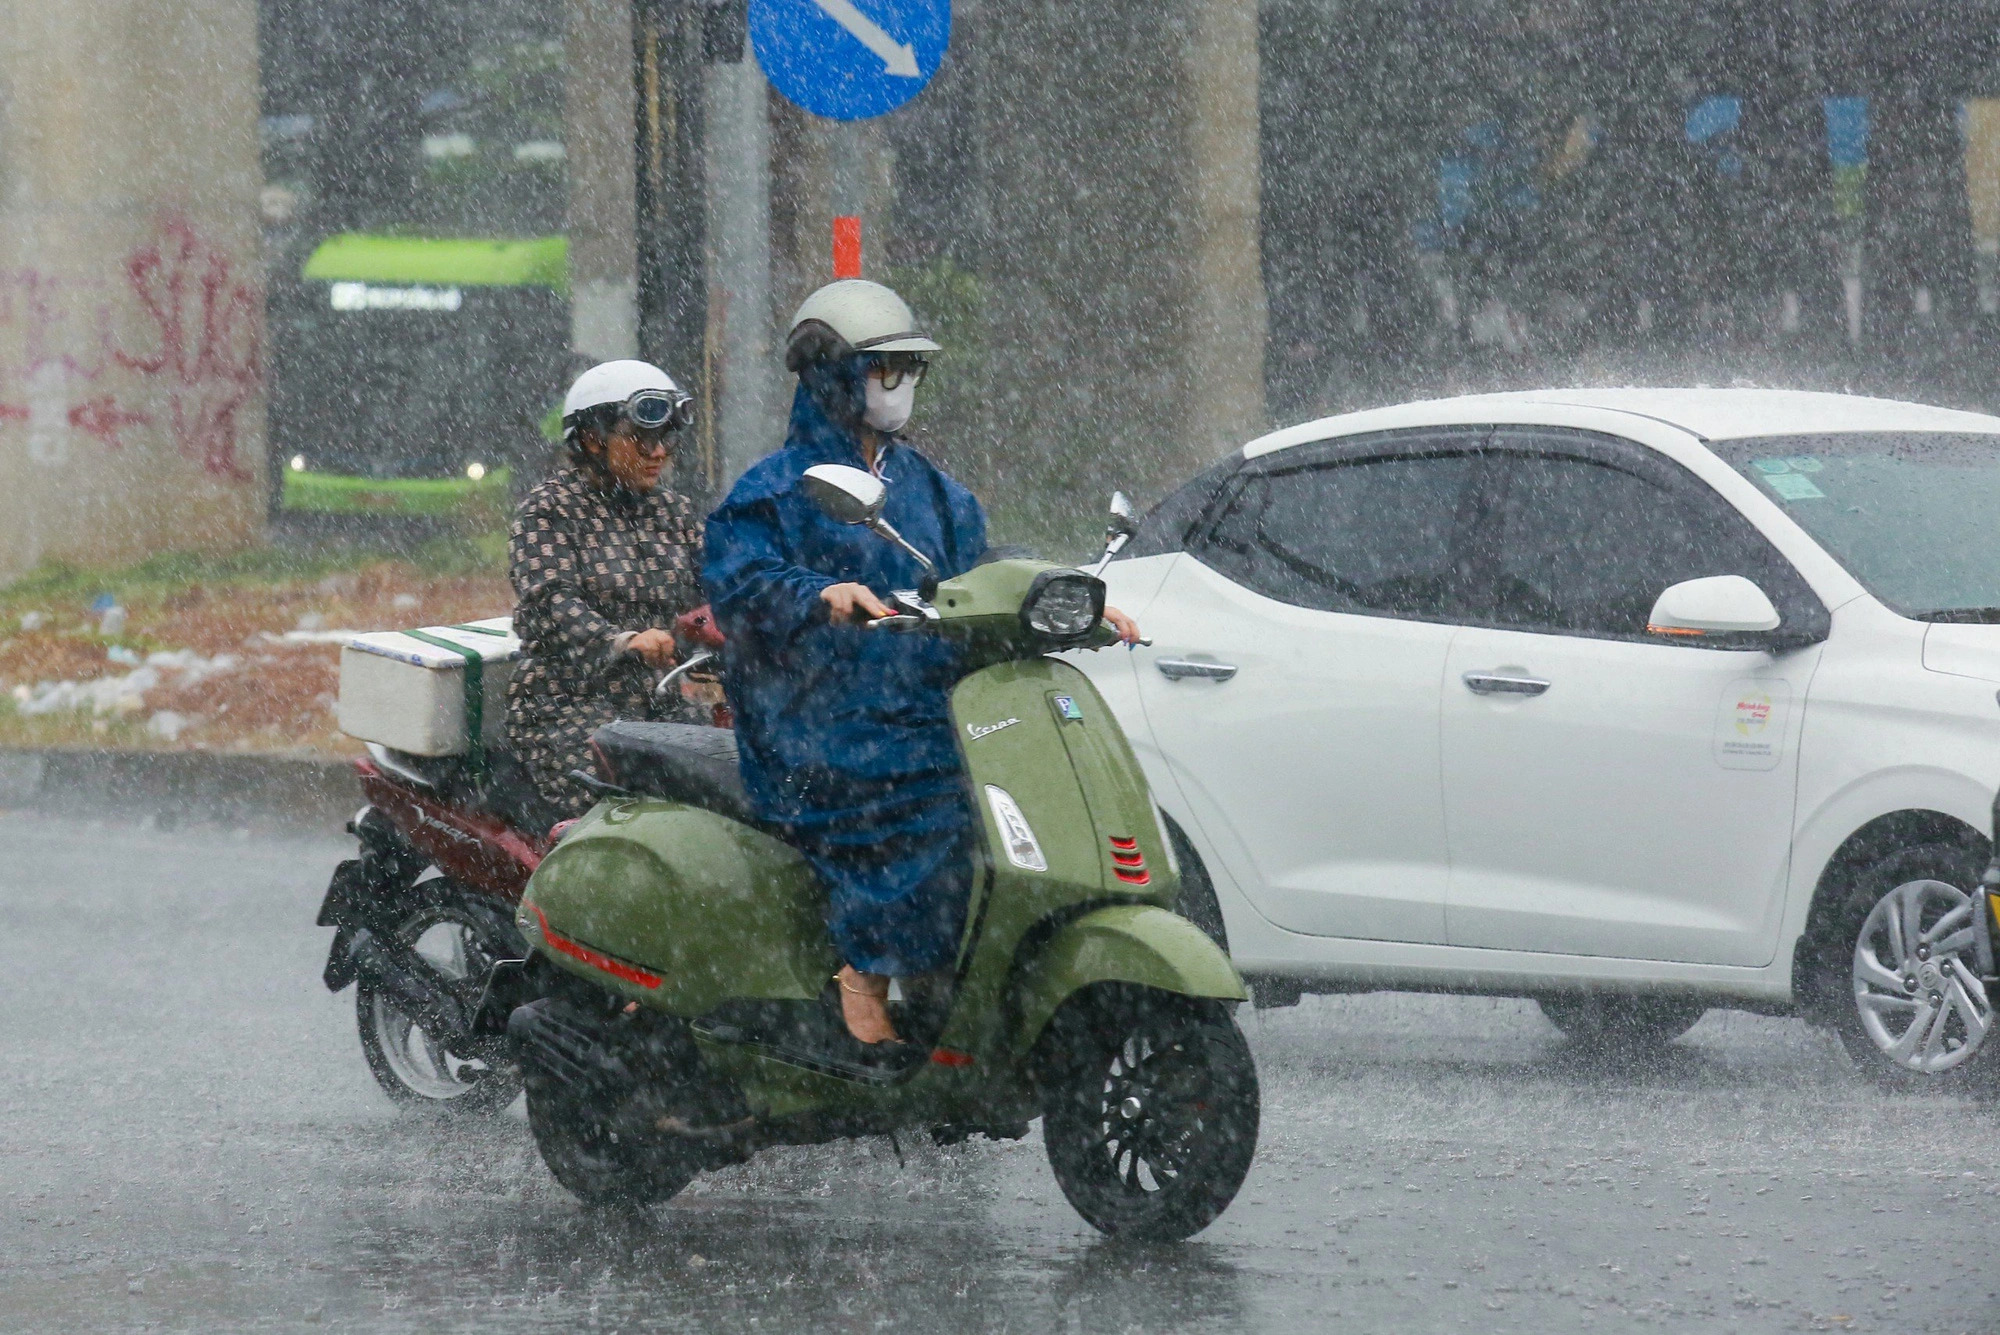 Heatwave-hit Ho Chi Minh City expected to see heavy showers this week